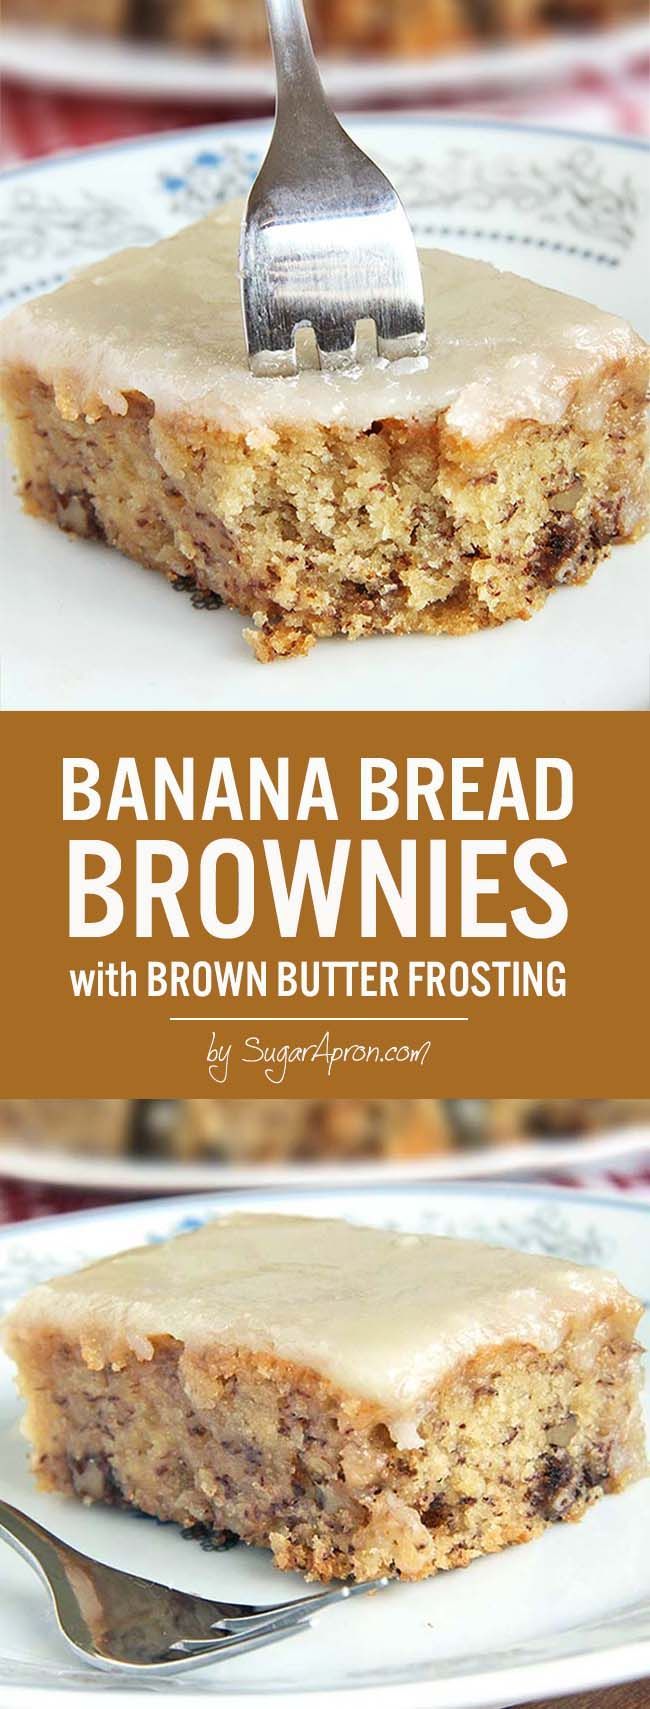 The world needs to know. The sweet taste of banana bread brownies topped with a brown butter frosting.